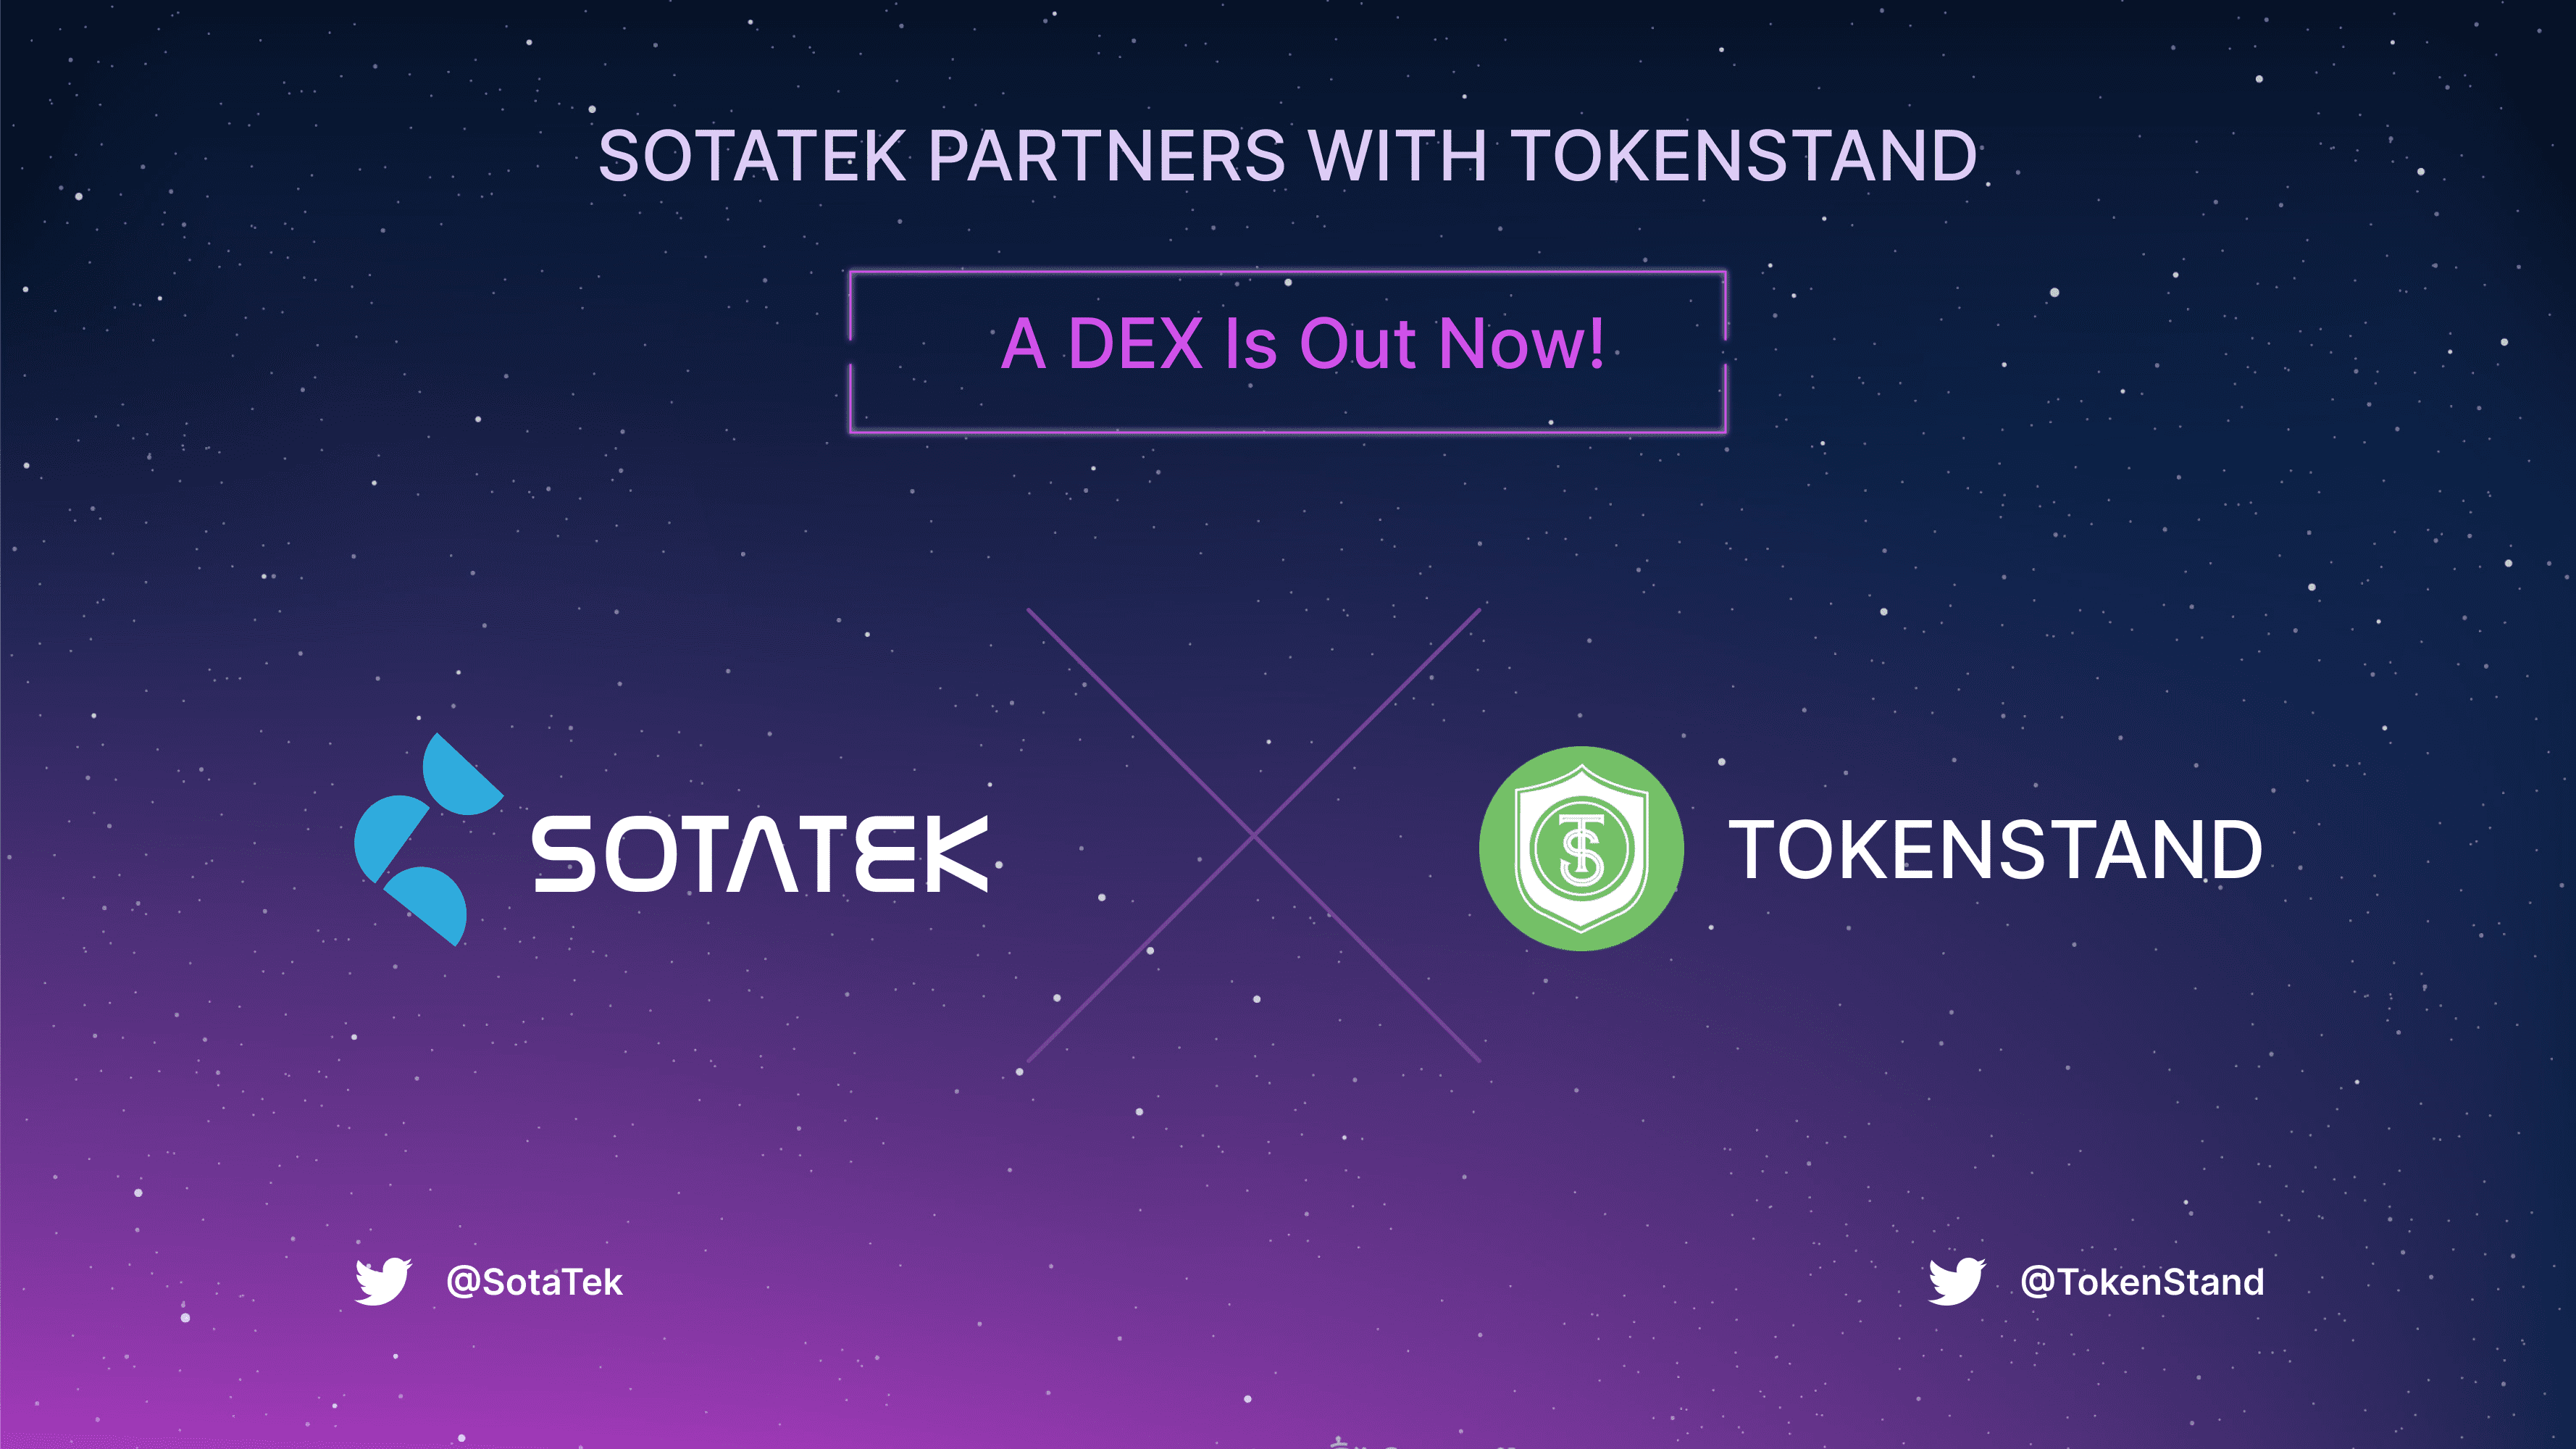 technical-partnership-between-sotatek-and-token-stand-a-dex-is-out-now